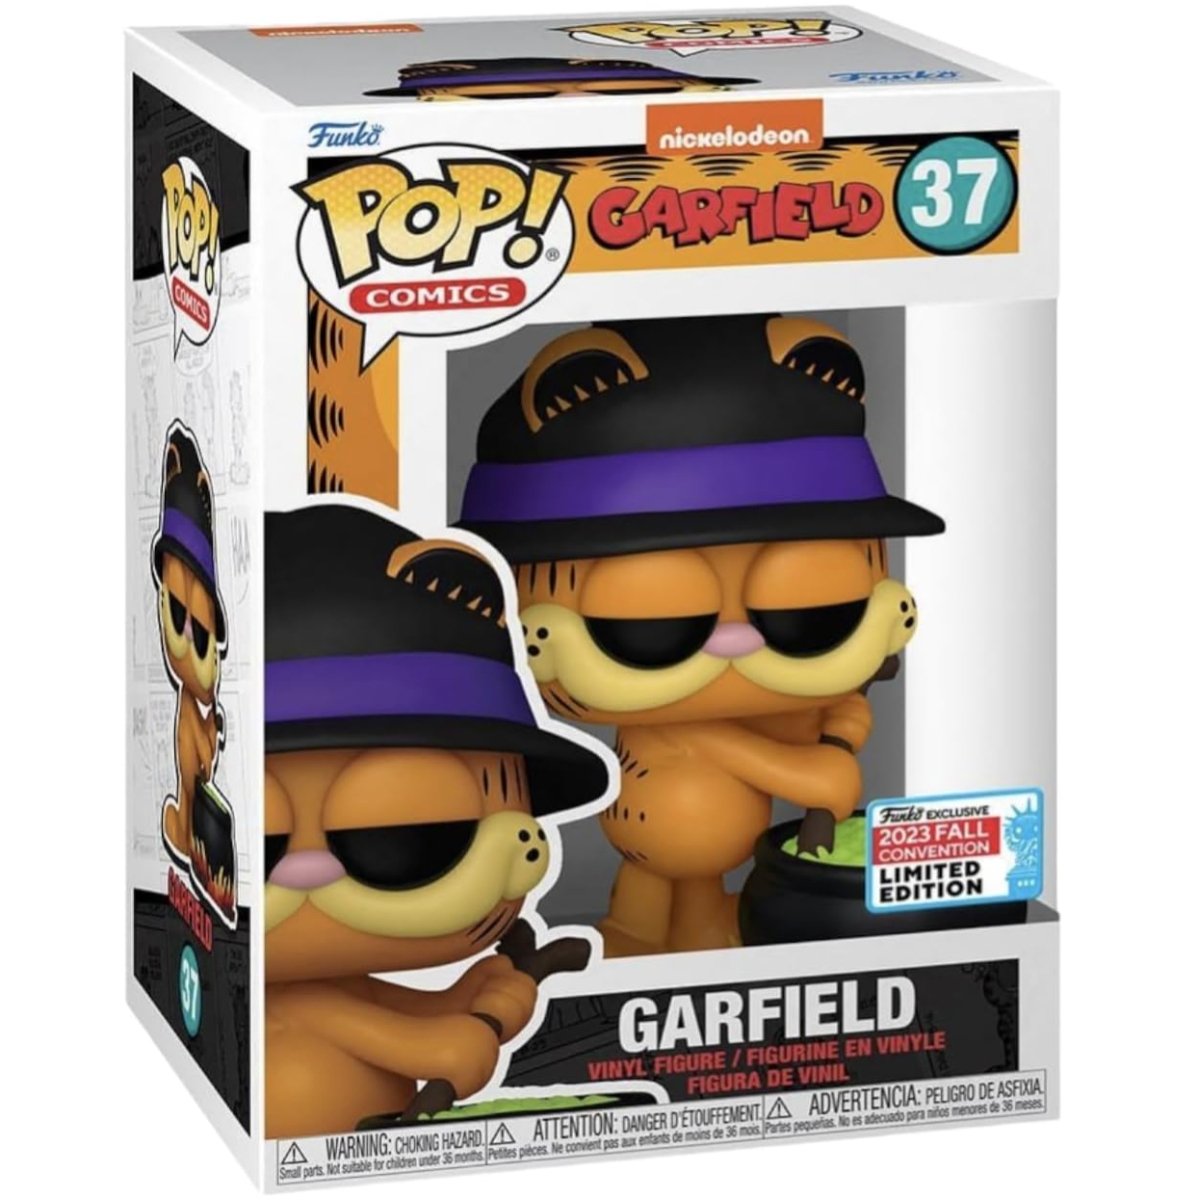 Garfield - Garfield [with Cauldron] (2023 Fall Convention Limited Edition) #37 - Funko Pop! Vinyl Animation - Persona Toys